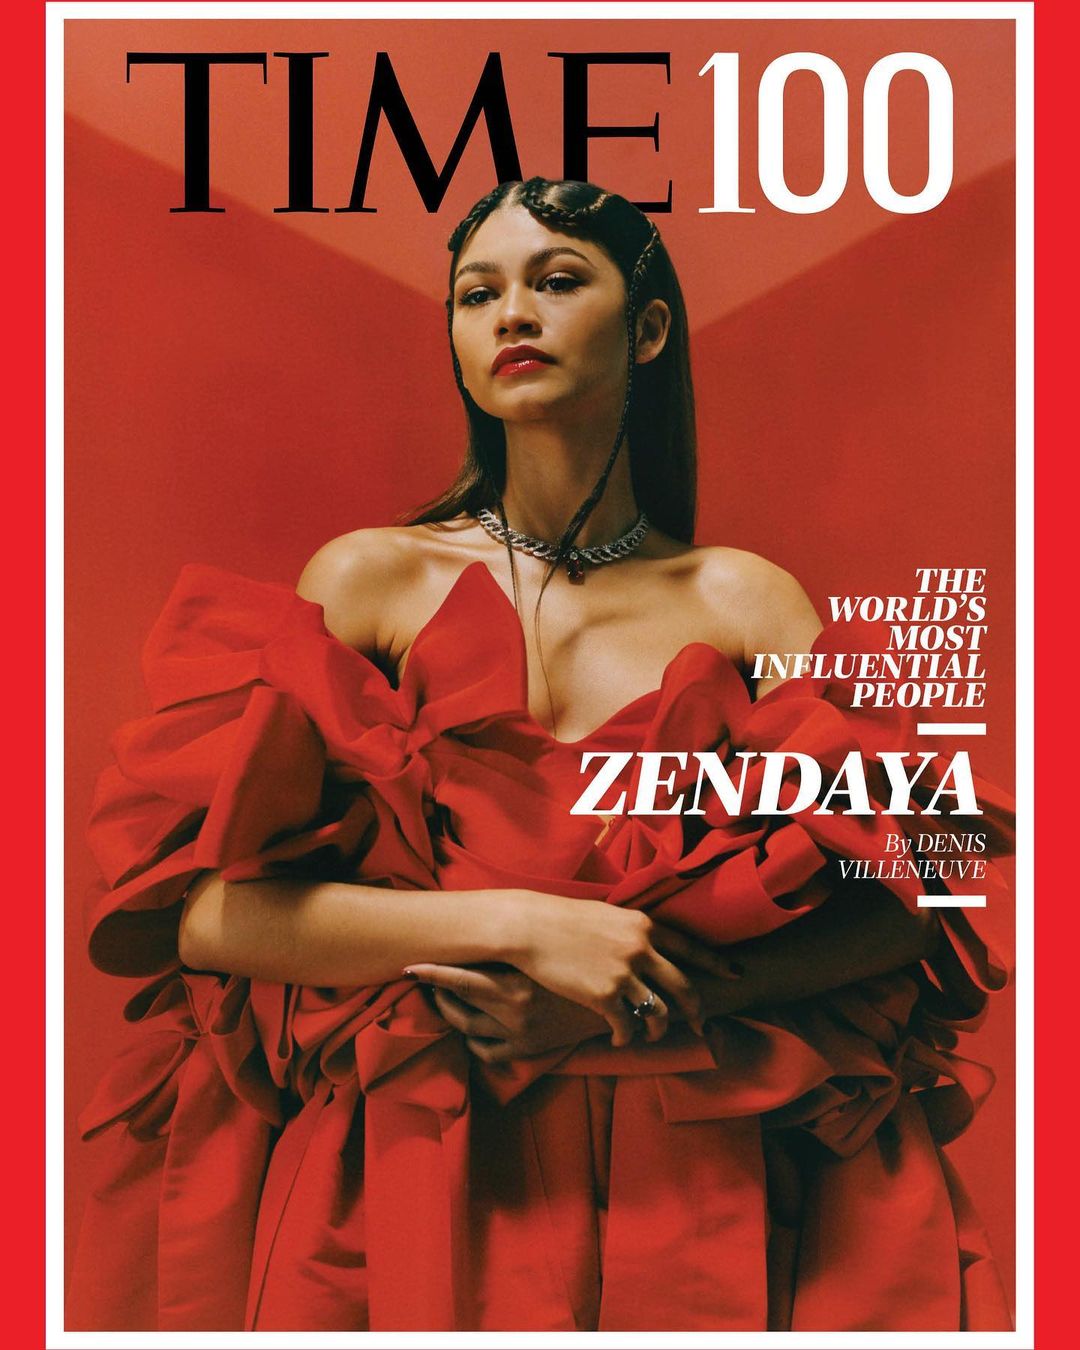 A great honor. Thank you @TIME for this acknowledgment, and to Denis for his kind words. This means the world to me♥️ #TIME